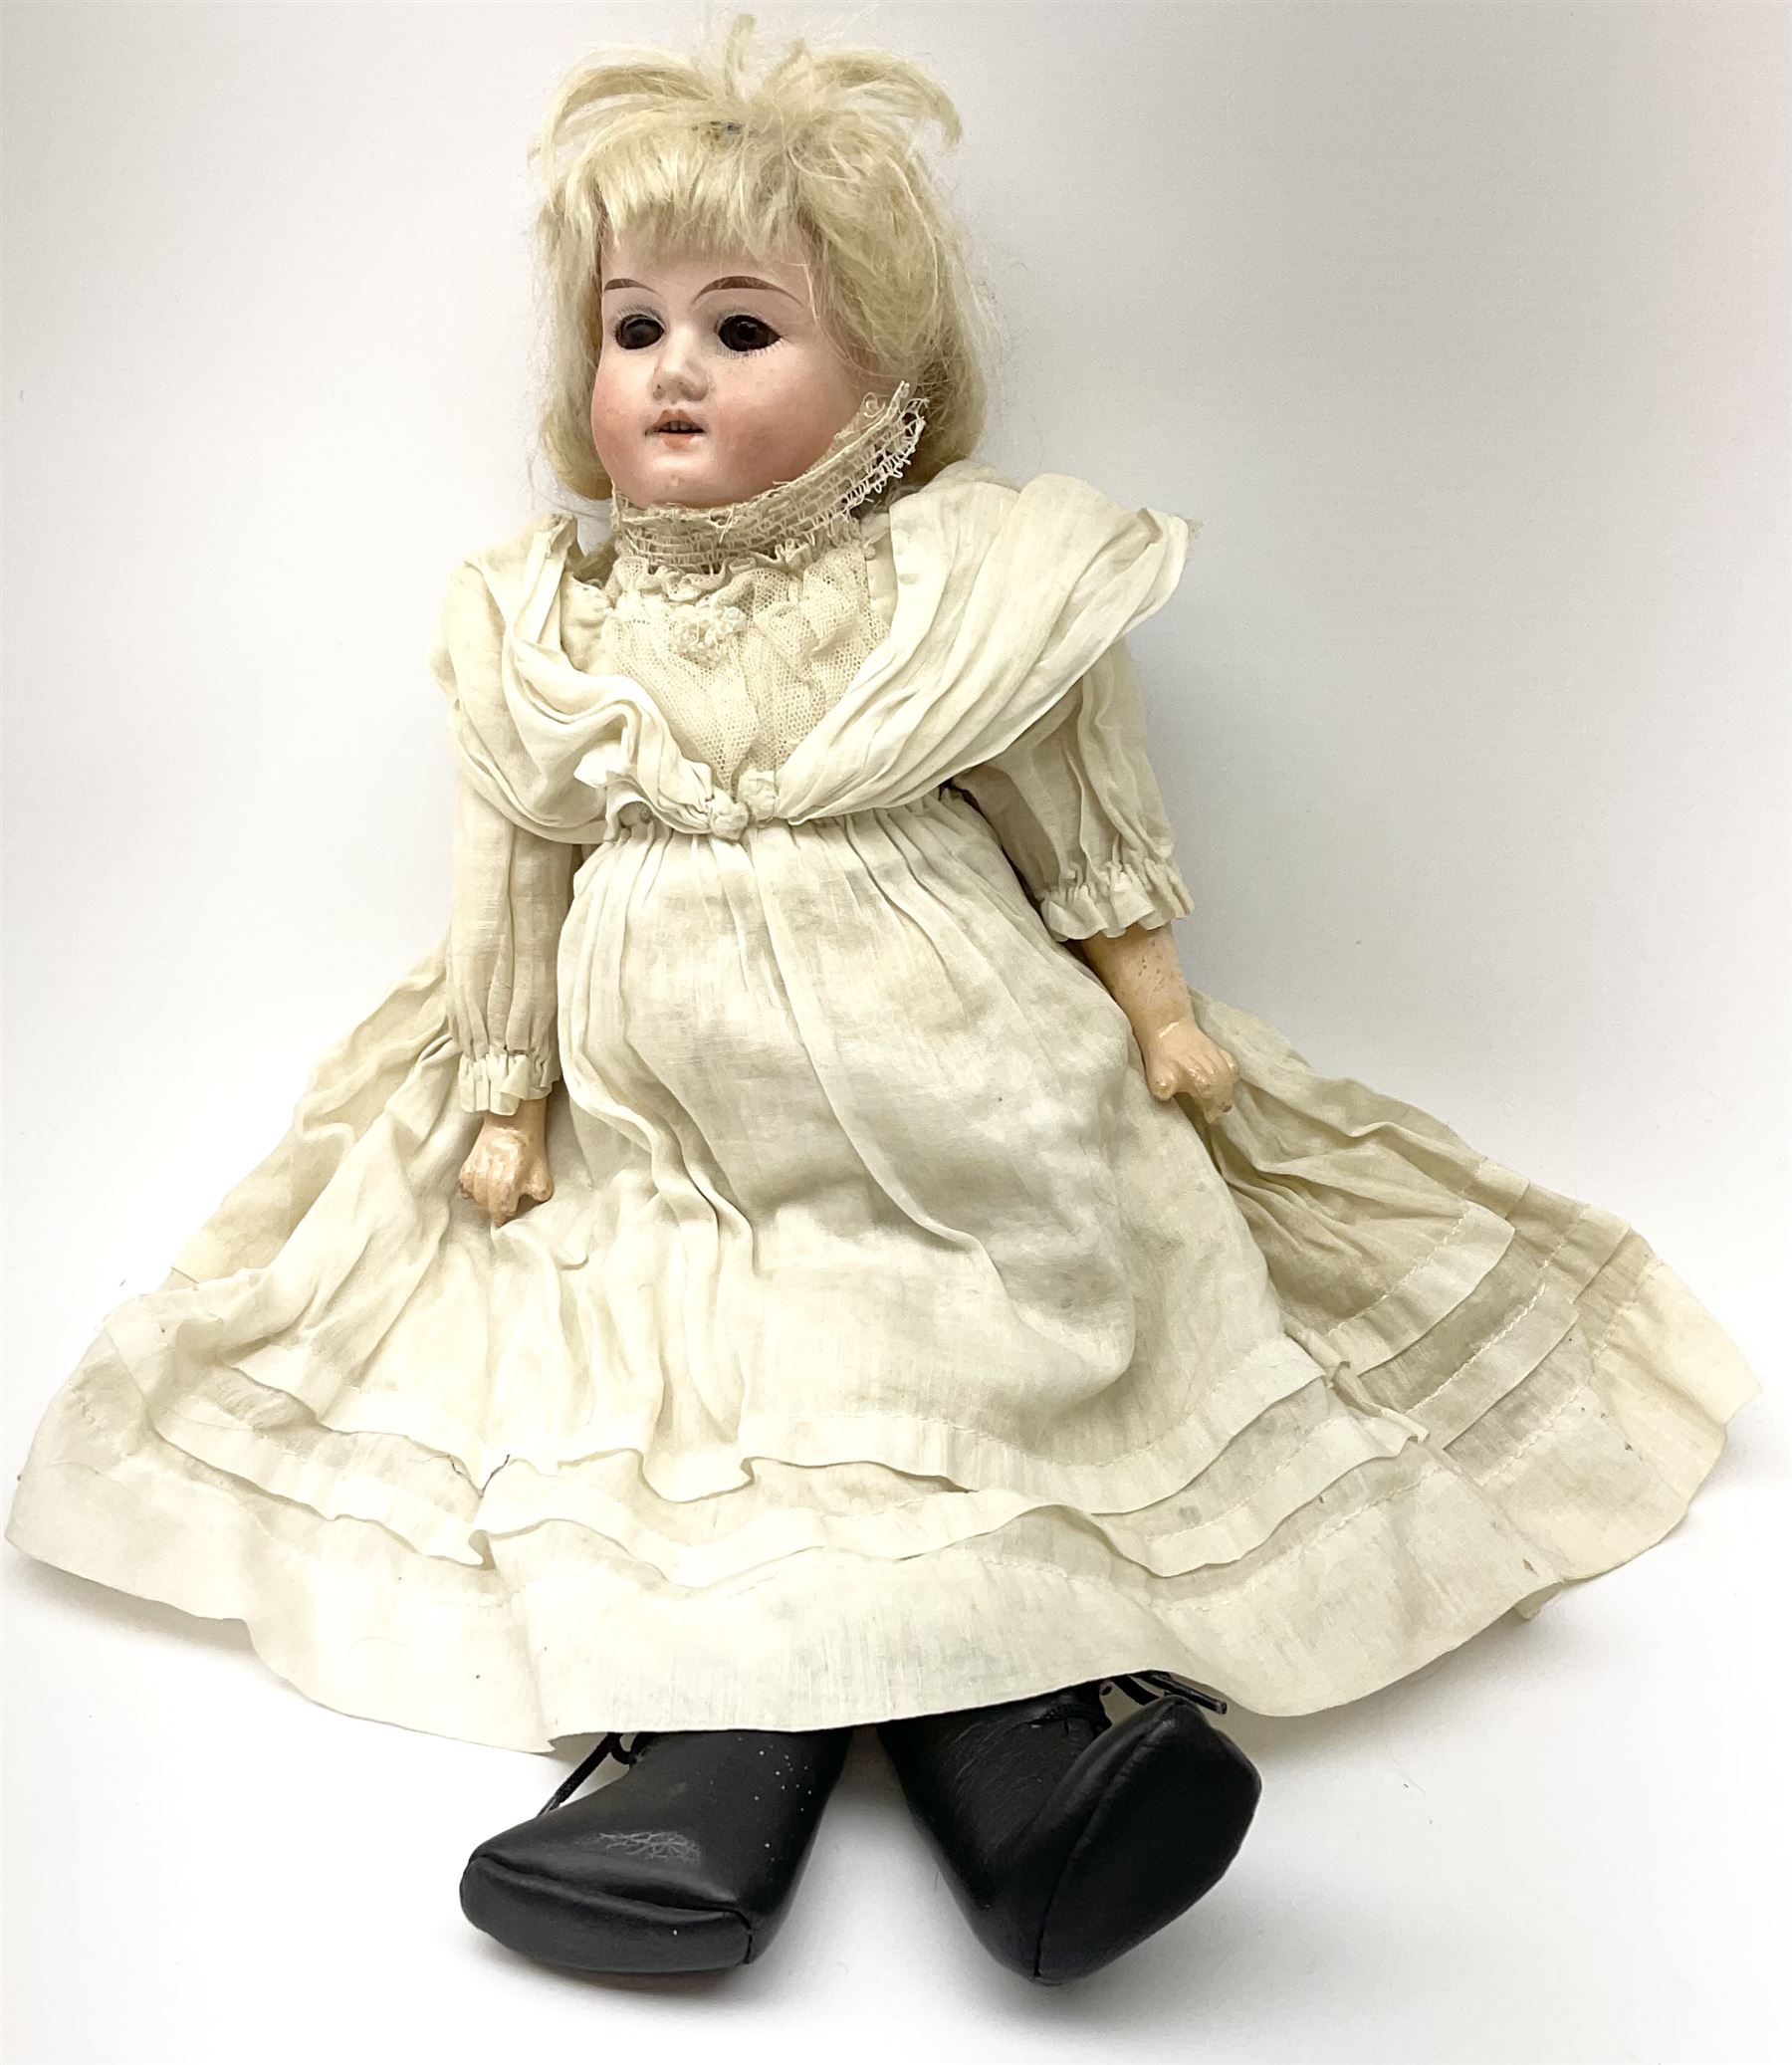 Armand Marseille Koppelsdorf bisque head doll with applied hair - Image 14 of 17